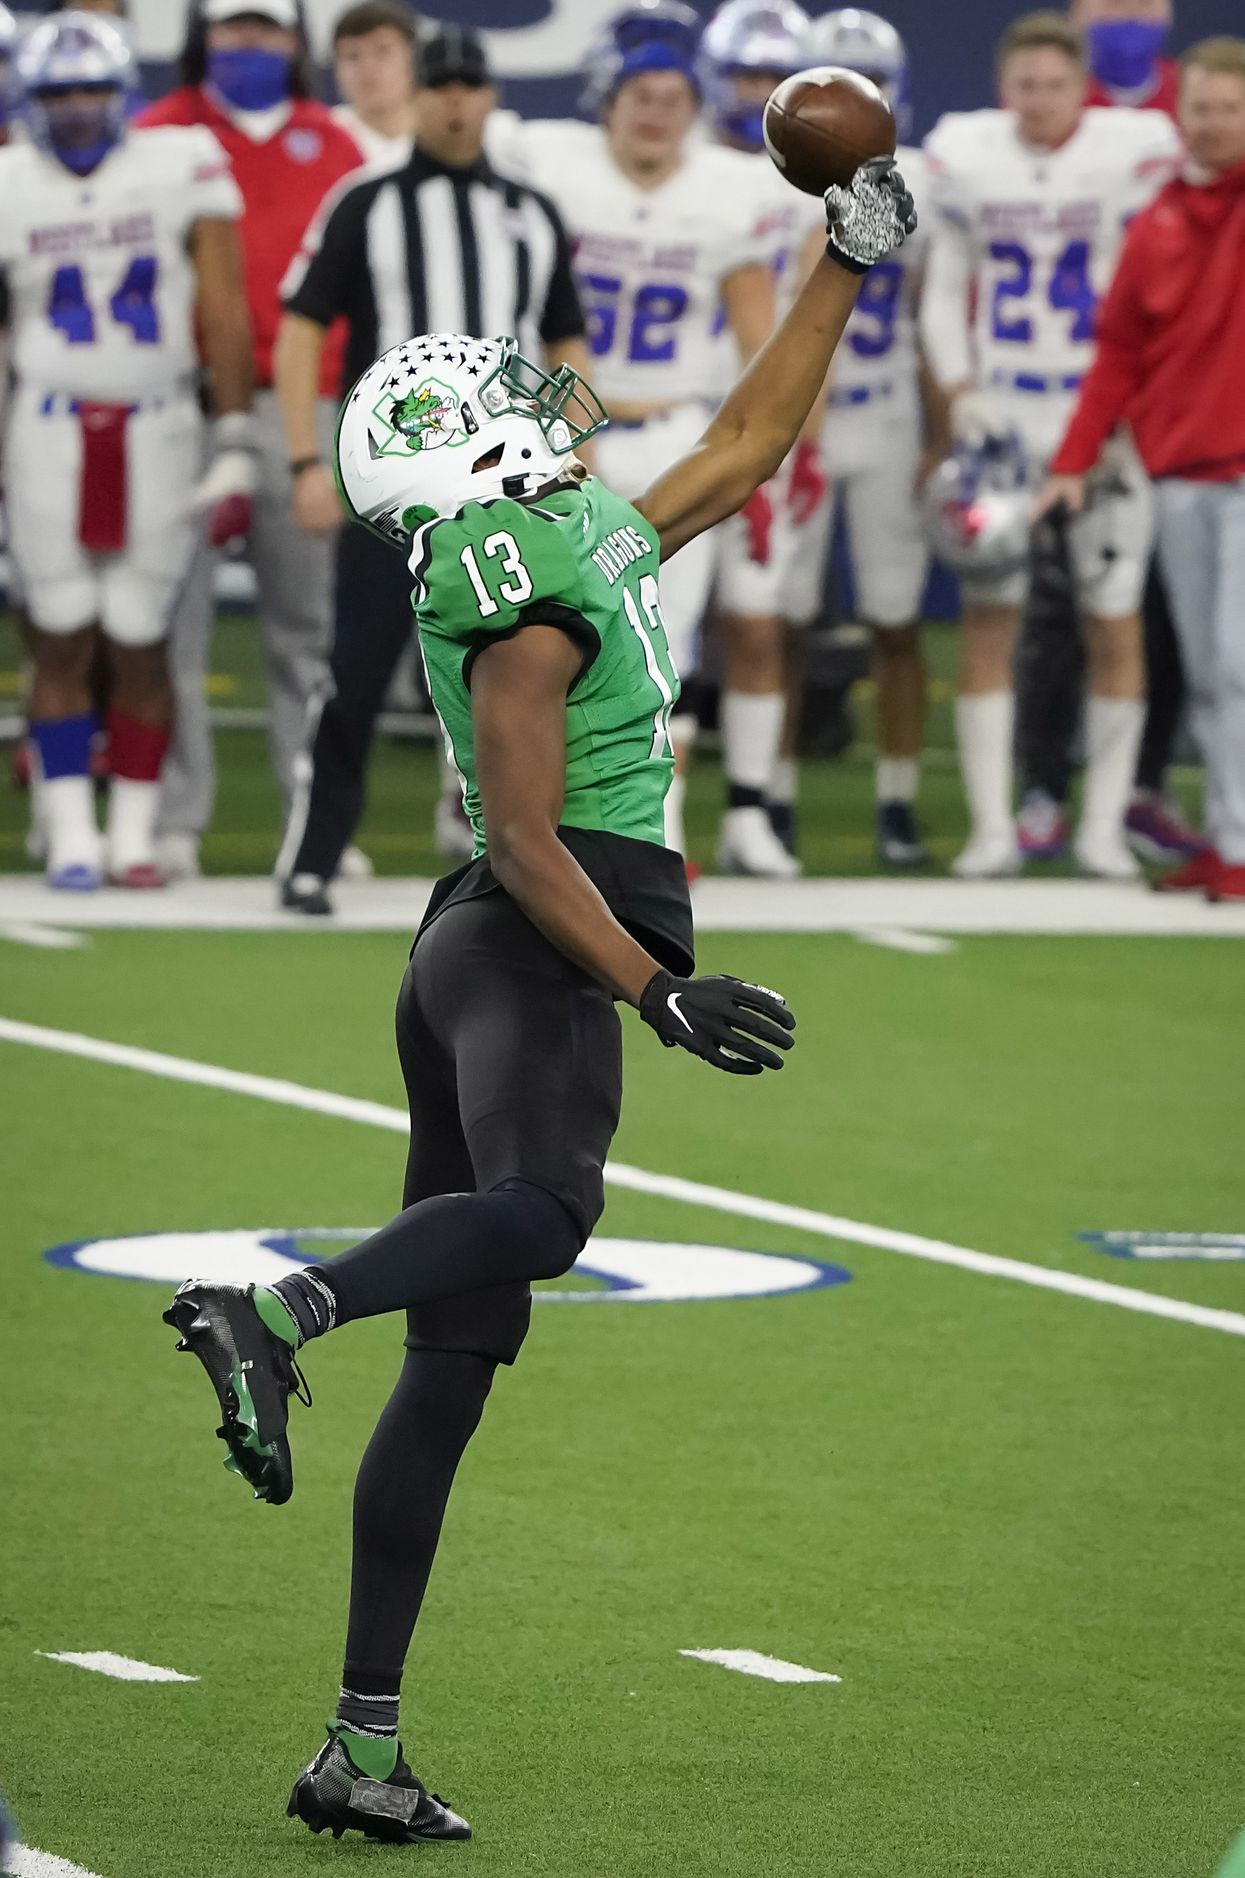 A pass goes of the hands of Southlake Carroll tight end RJ Maryland on a fourth down play...